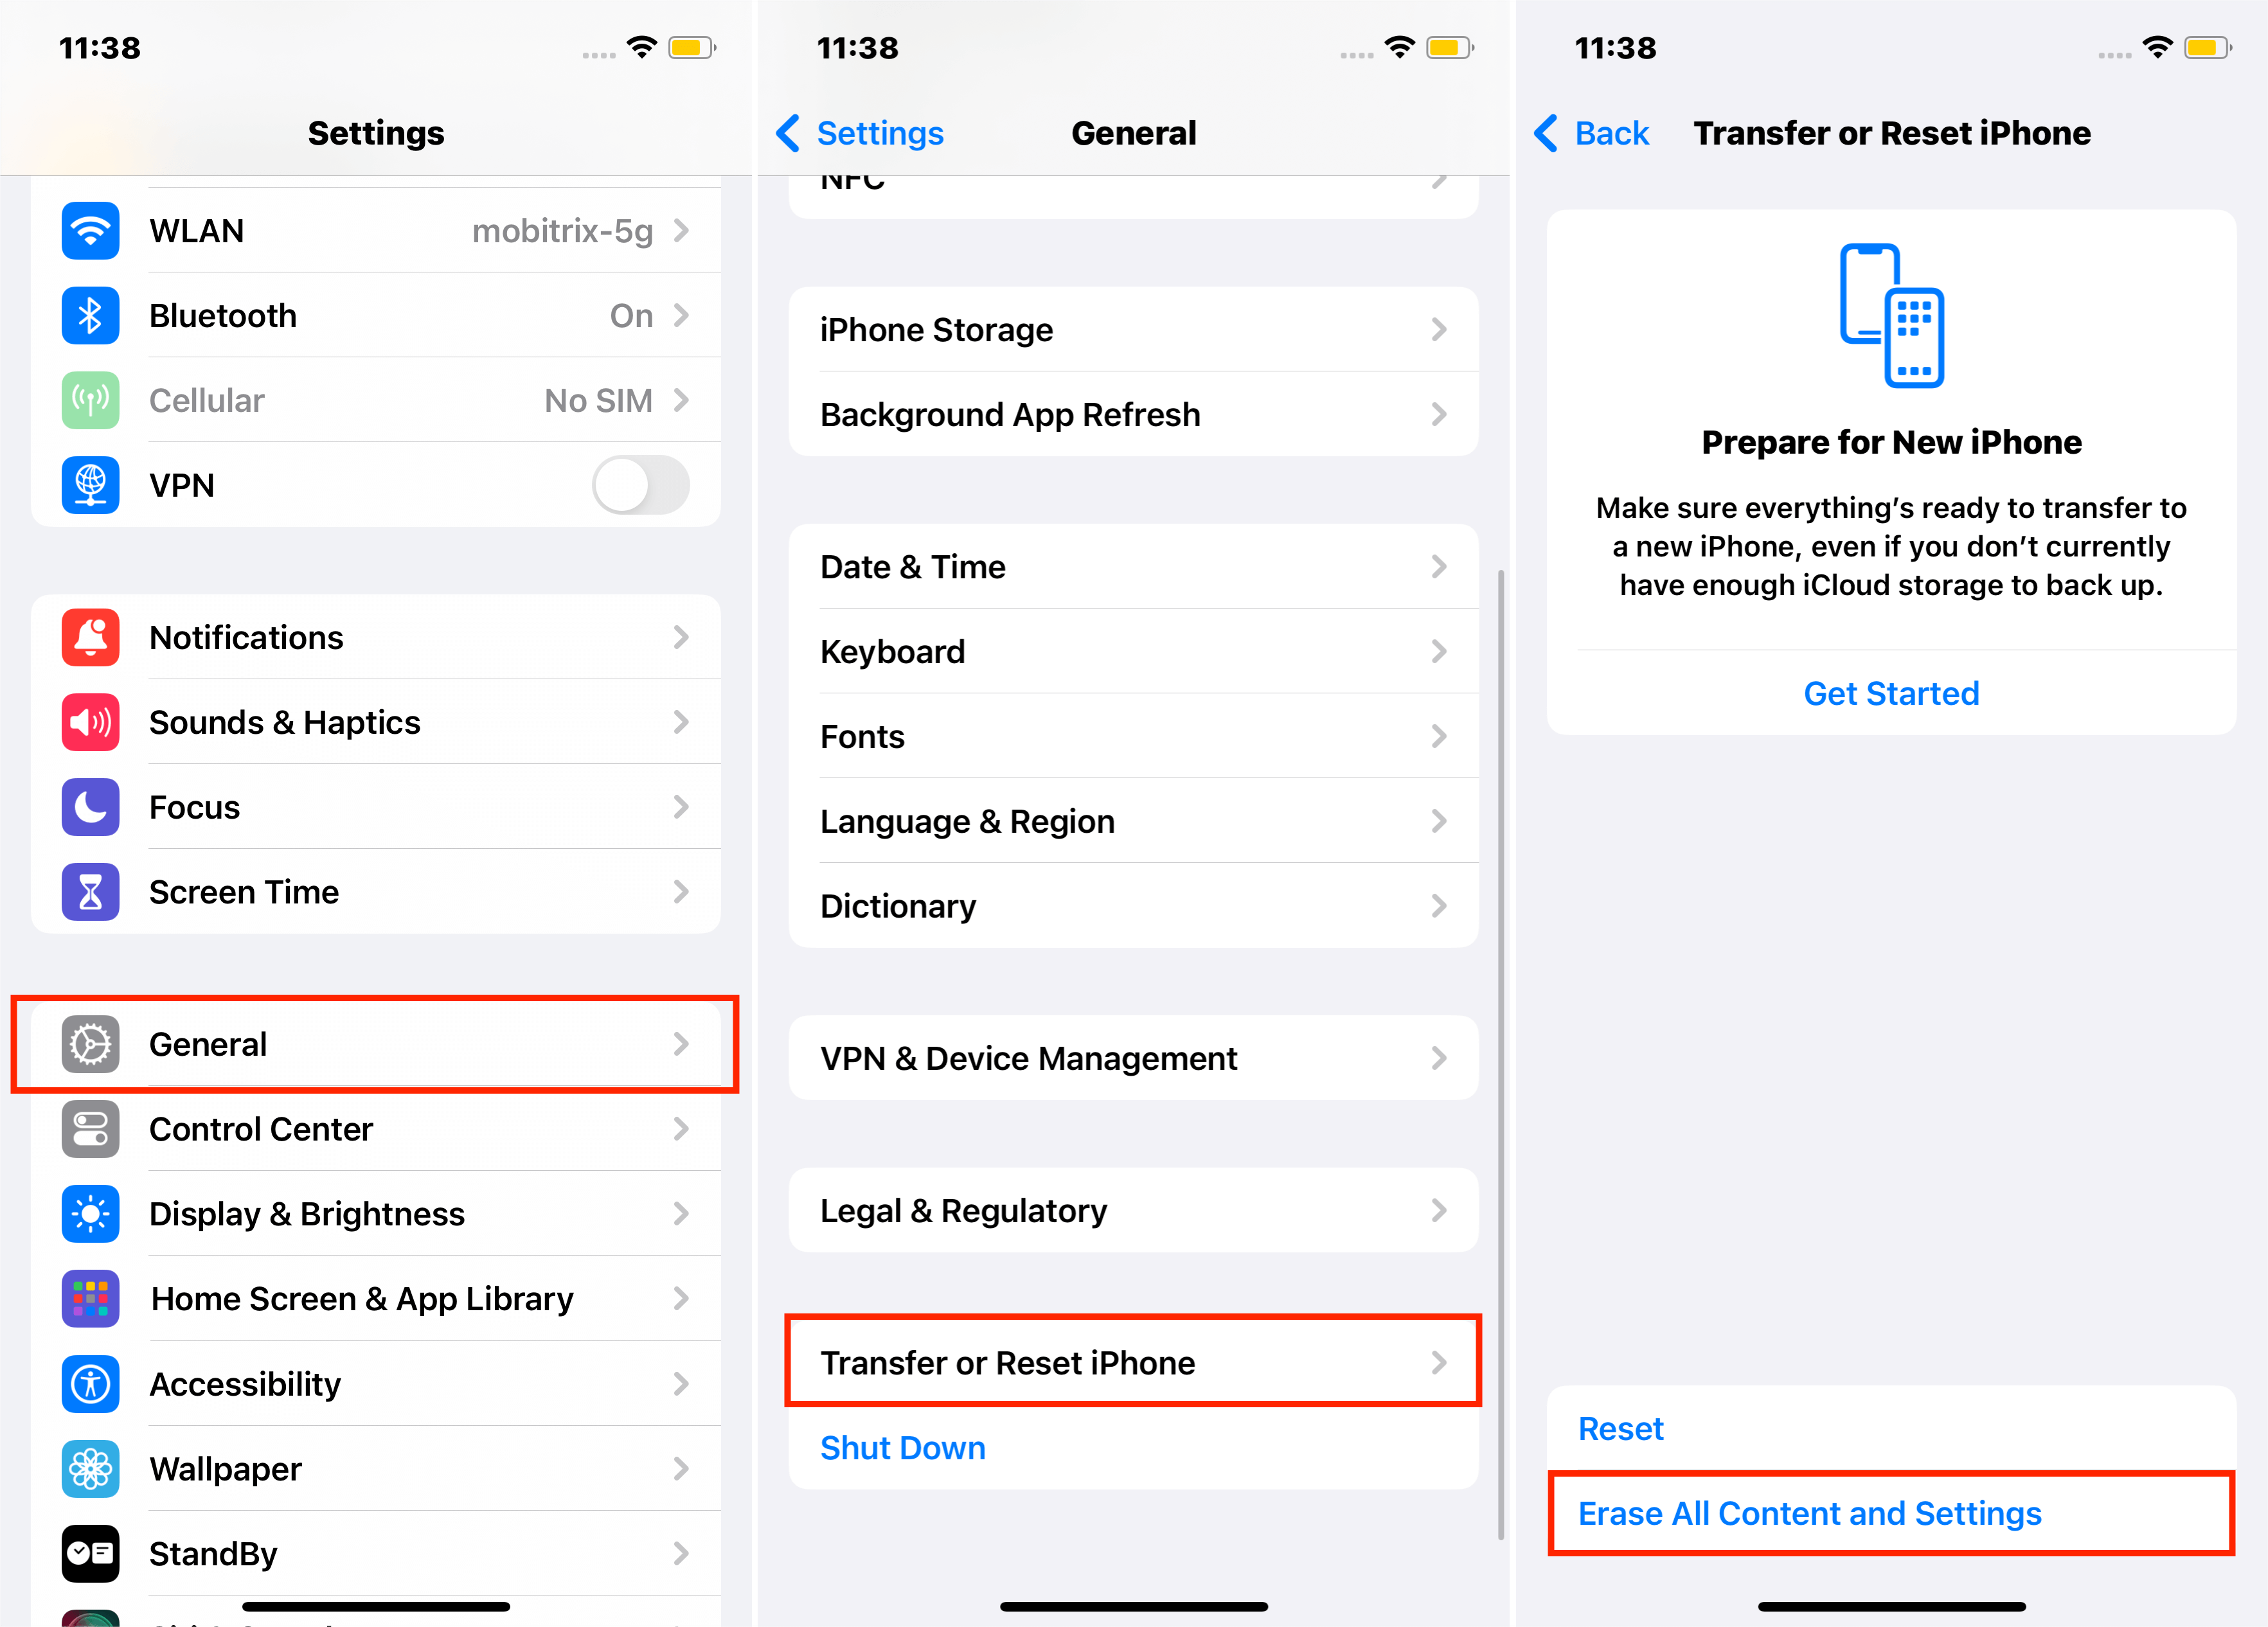 Steps To Erase All Content And Settings Via Iphone Settings